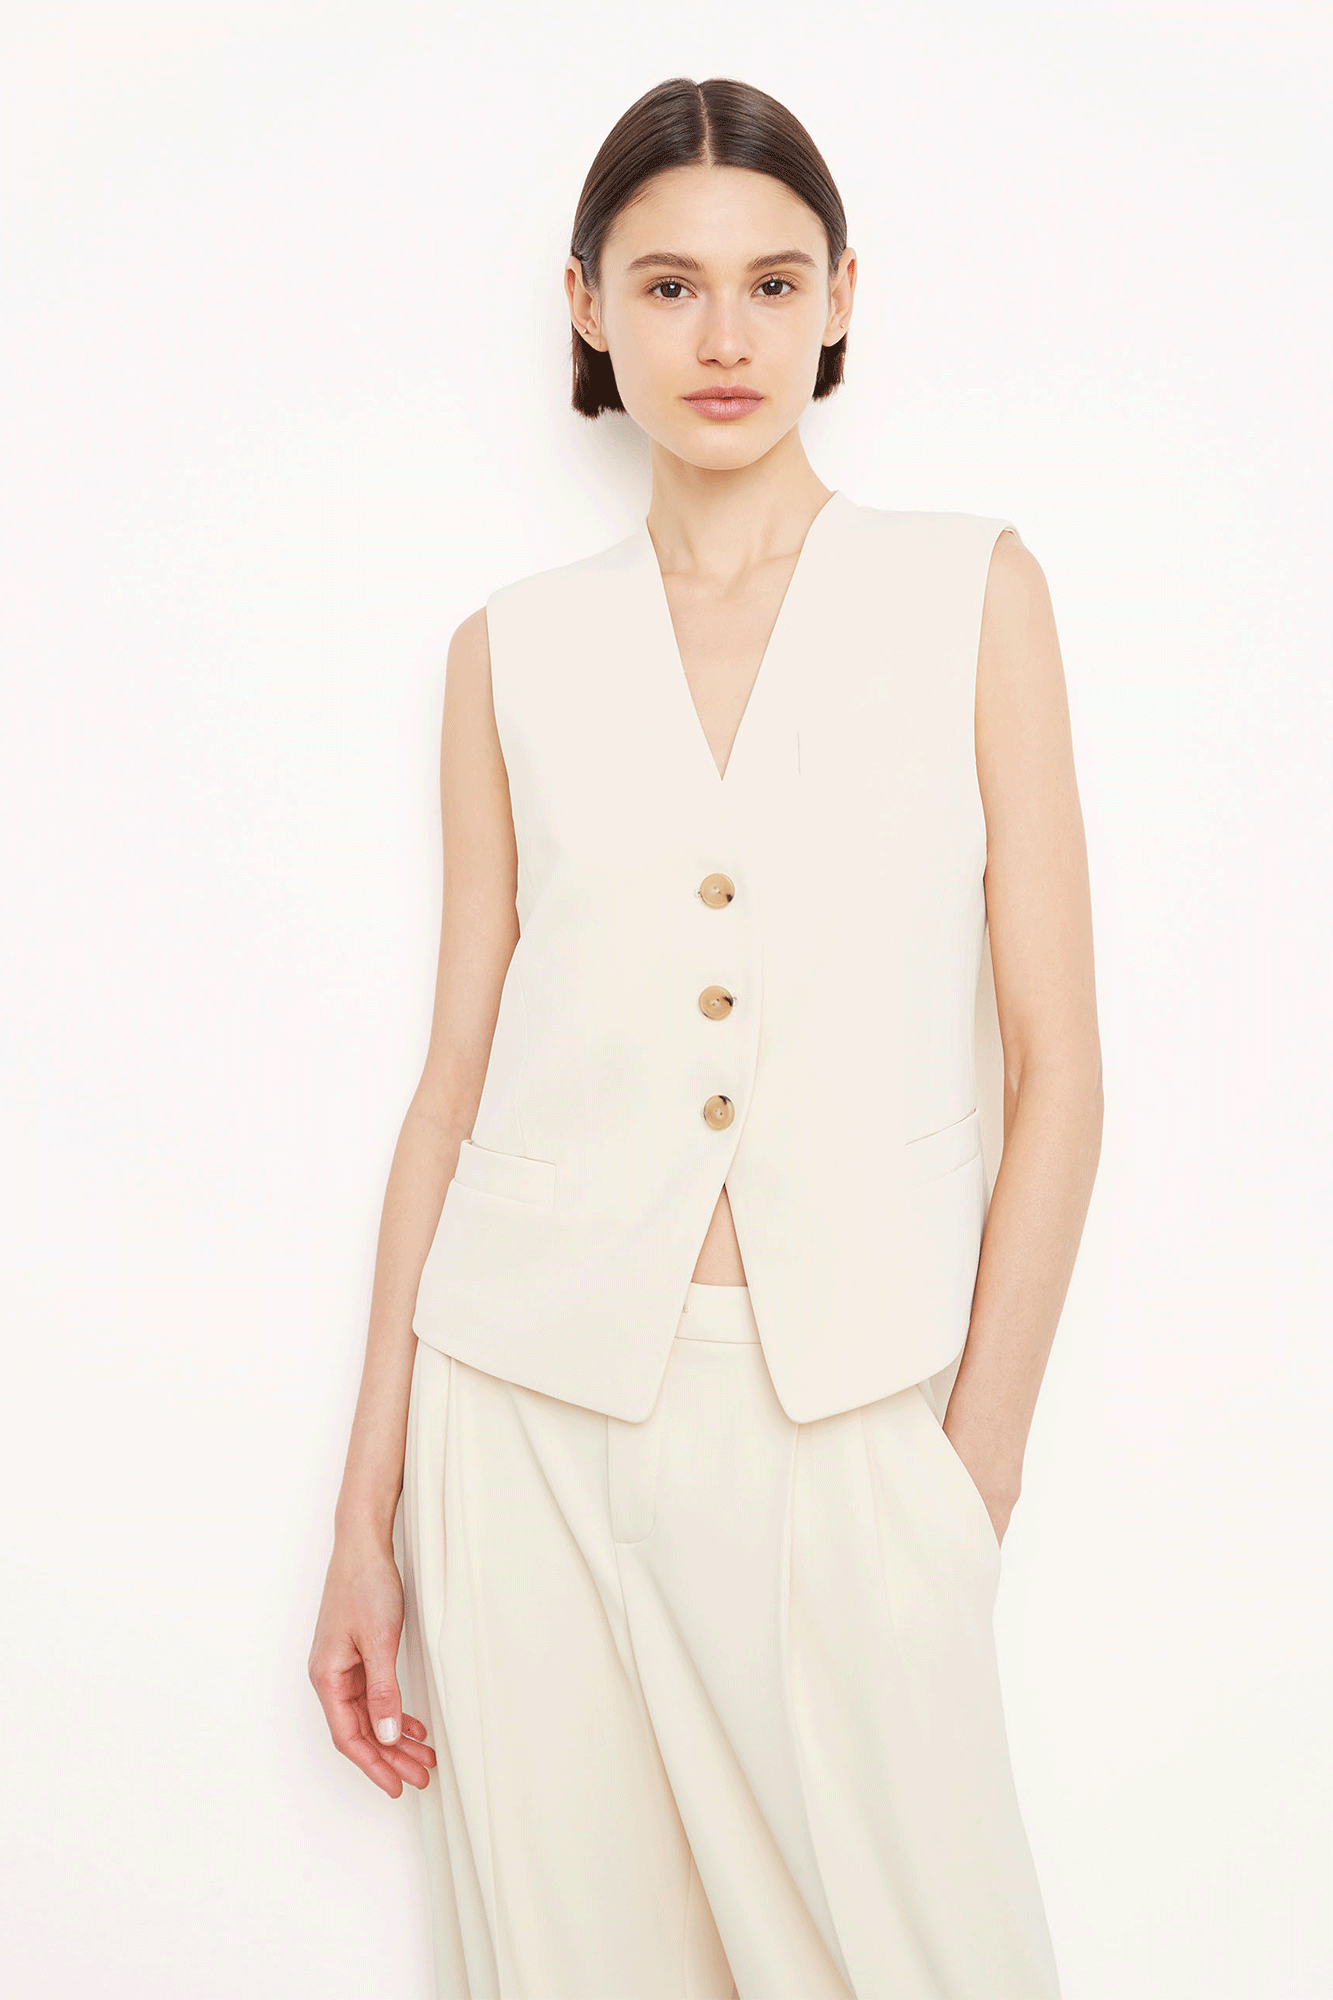 Update your wardrobe with this sophisticated Crepe Vest from Vince. It is fully lined for effortless layering. 